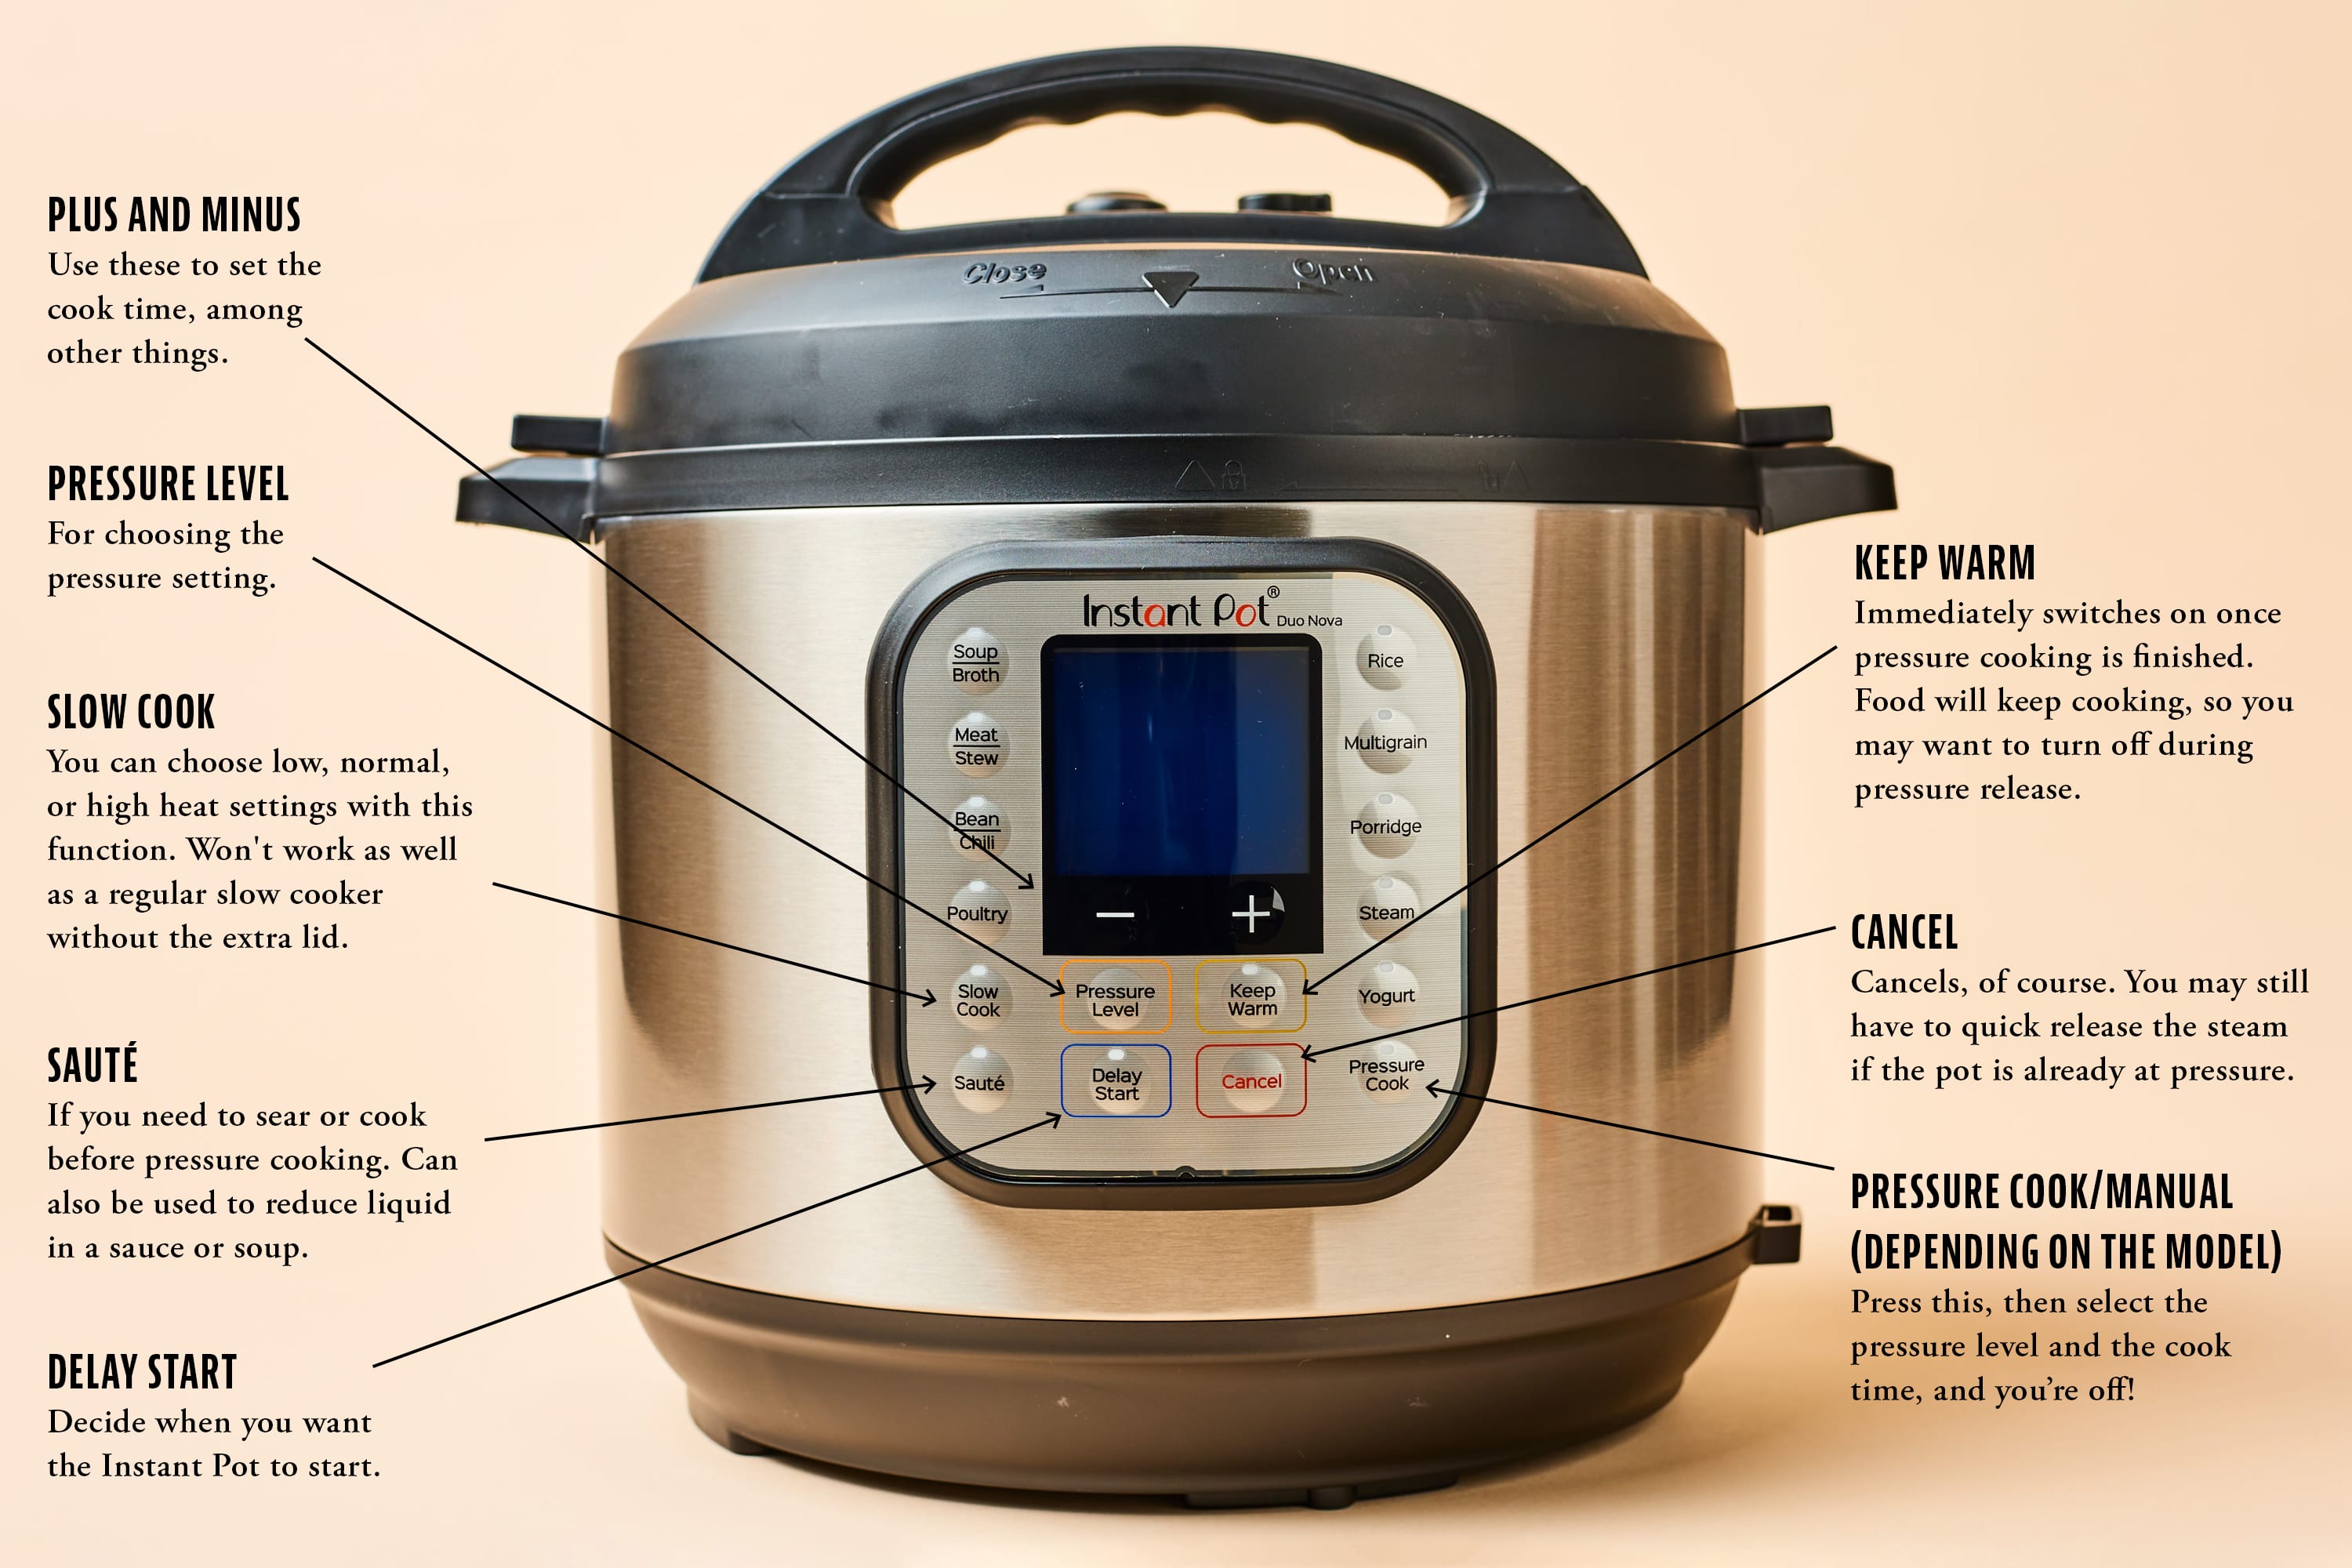 Instant Pot Lux Review: An Almost Perfect Entry-Level Multicooker